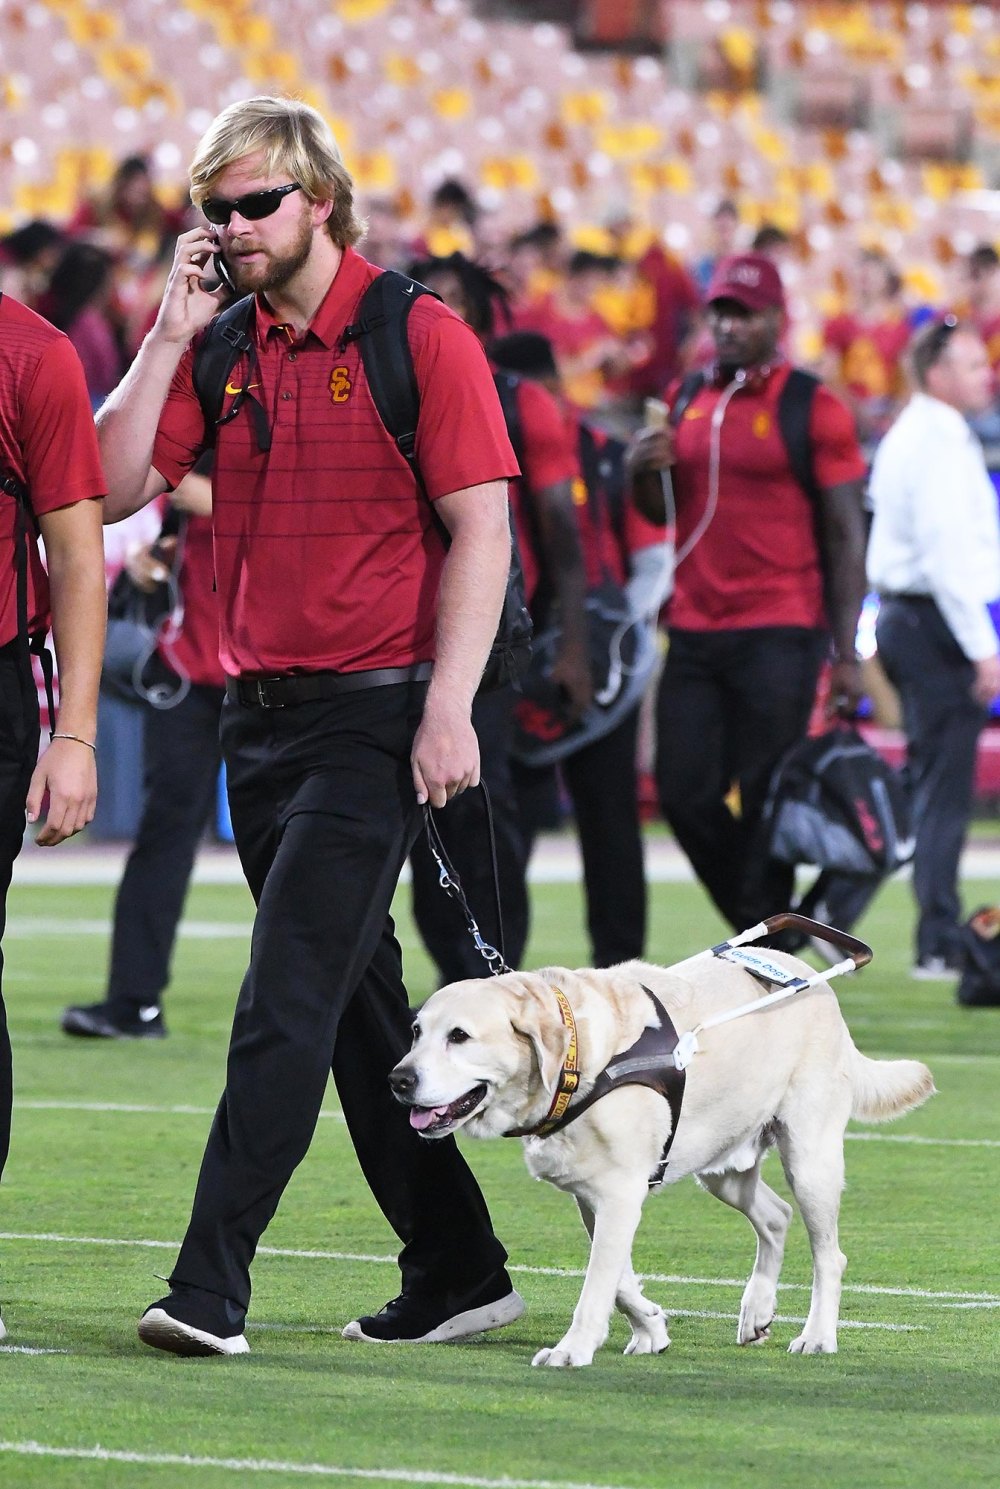 1st Ever Blind College Football Player Jake Olson Mourns the Loss of His Beloved Guide Dog